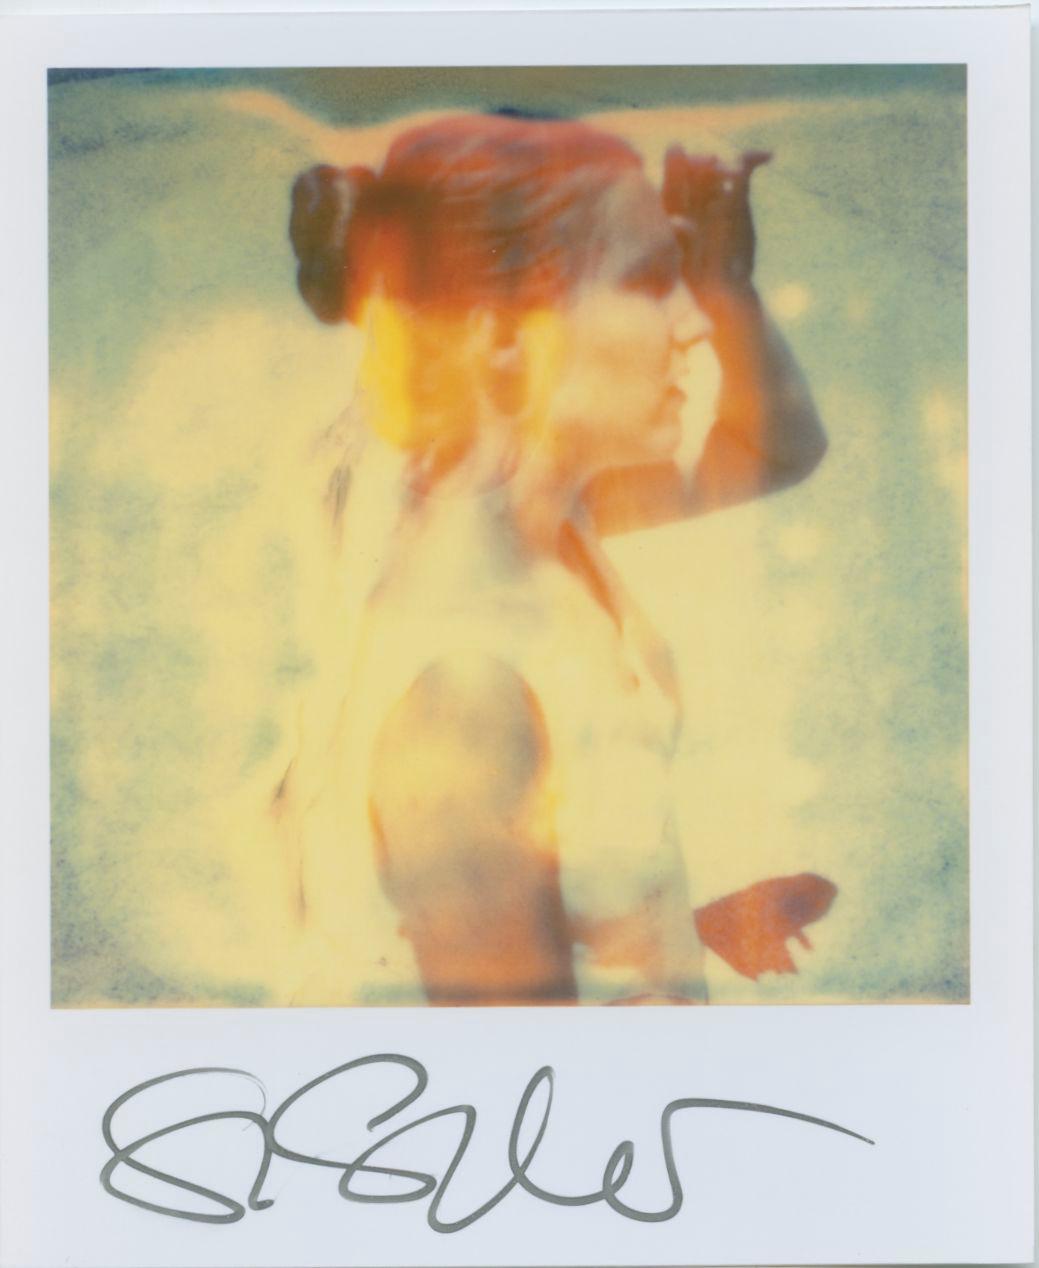 Stefanie Schneider Polaroid sized unlimited Mini 'Gestures' - 1999 - 

signed in front, not mounted. 
1 Digital Color Photographs based on a Polaroid. 

Polaroid sized open Editions 1999-2016
10.7 x 8.8cm (Image 7.9x7.7cm) each.

Stefanie Schneider